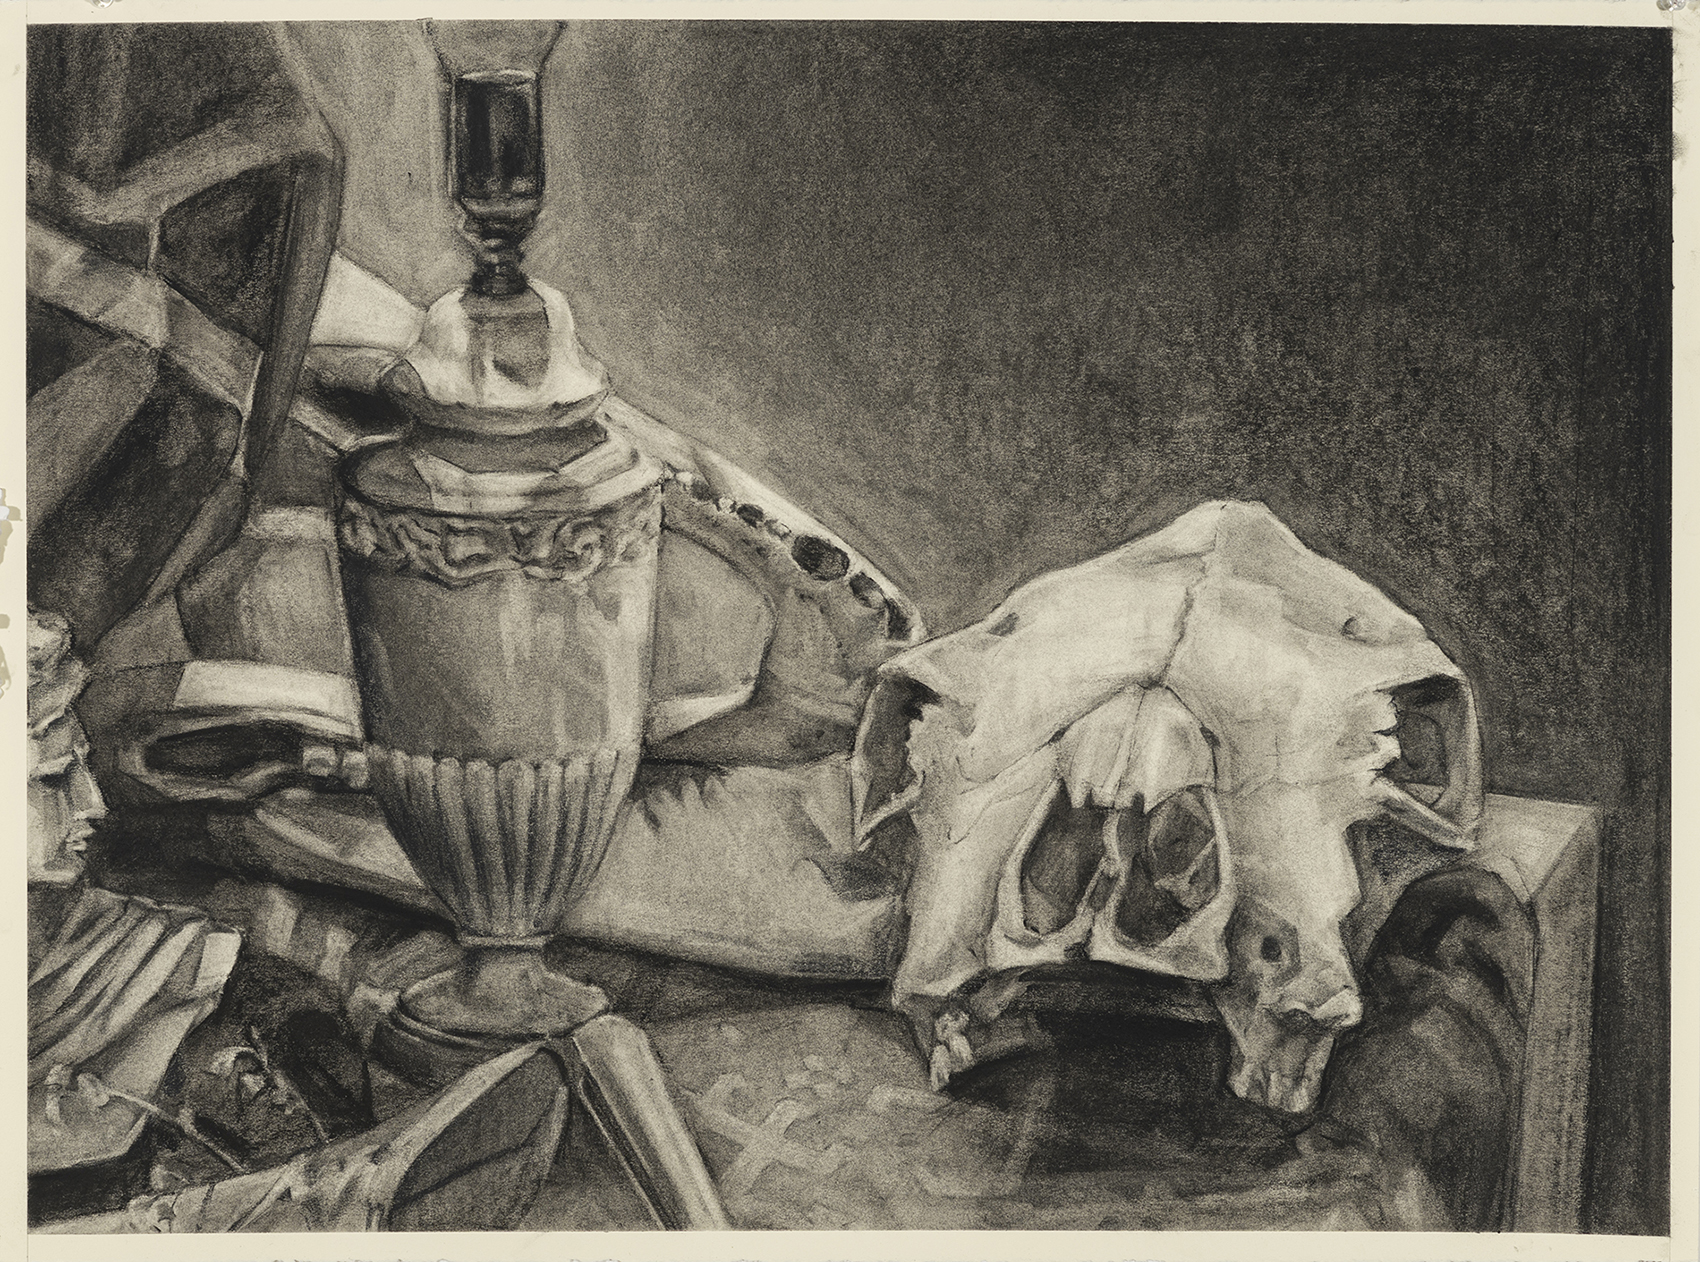 A still-life drawing with a skull, vase and other objects.